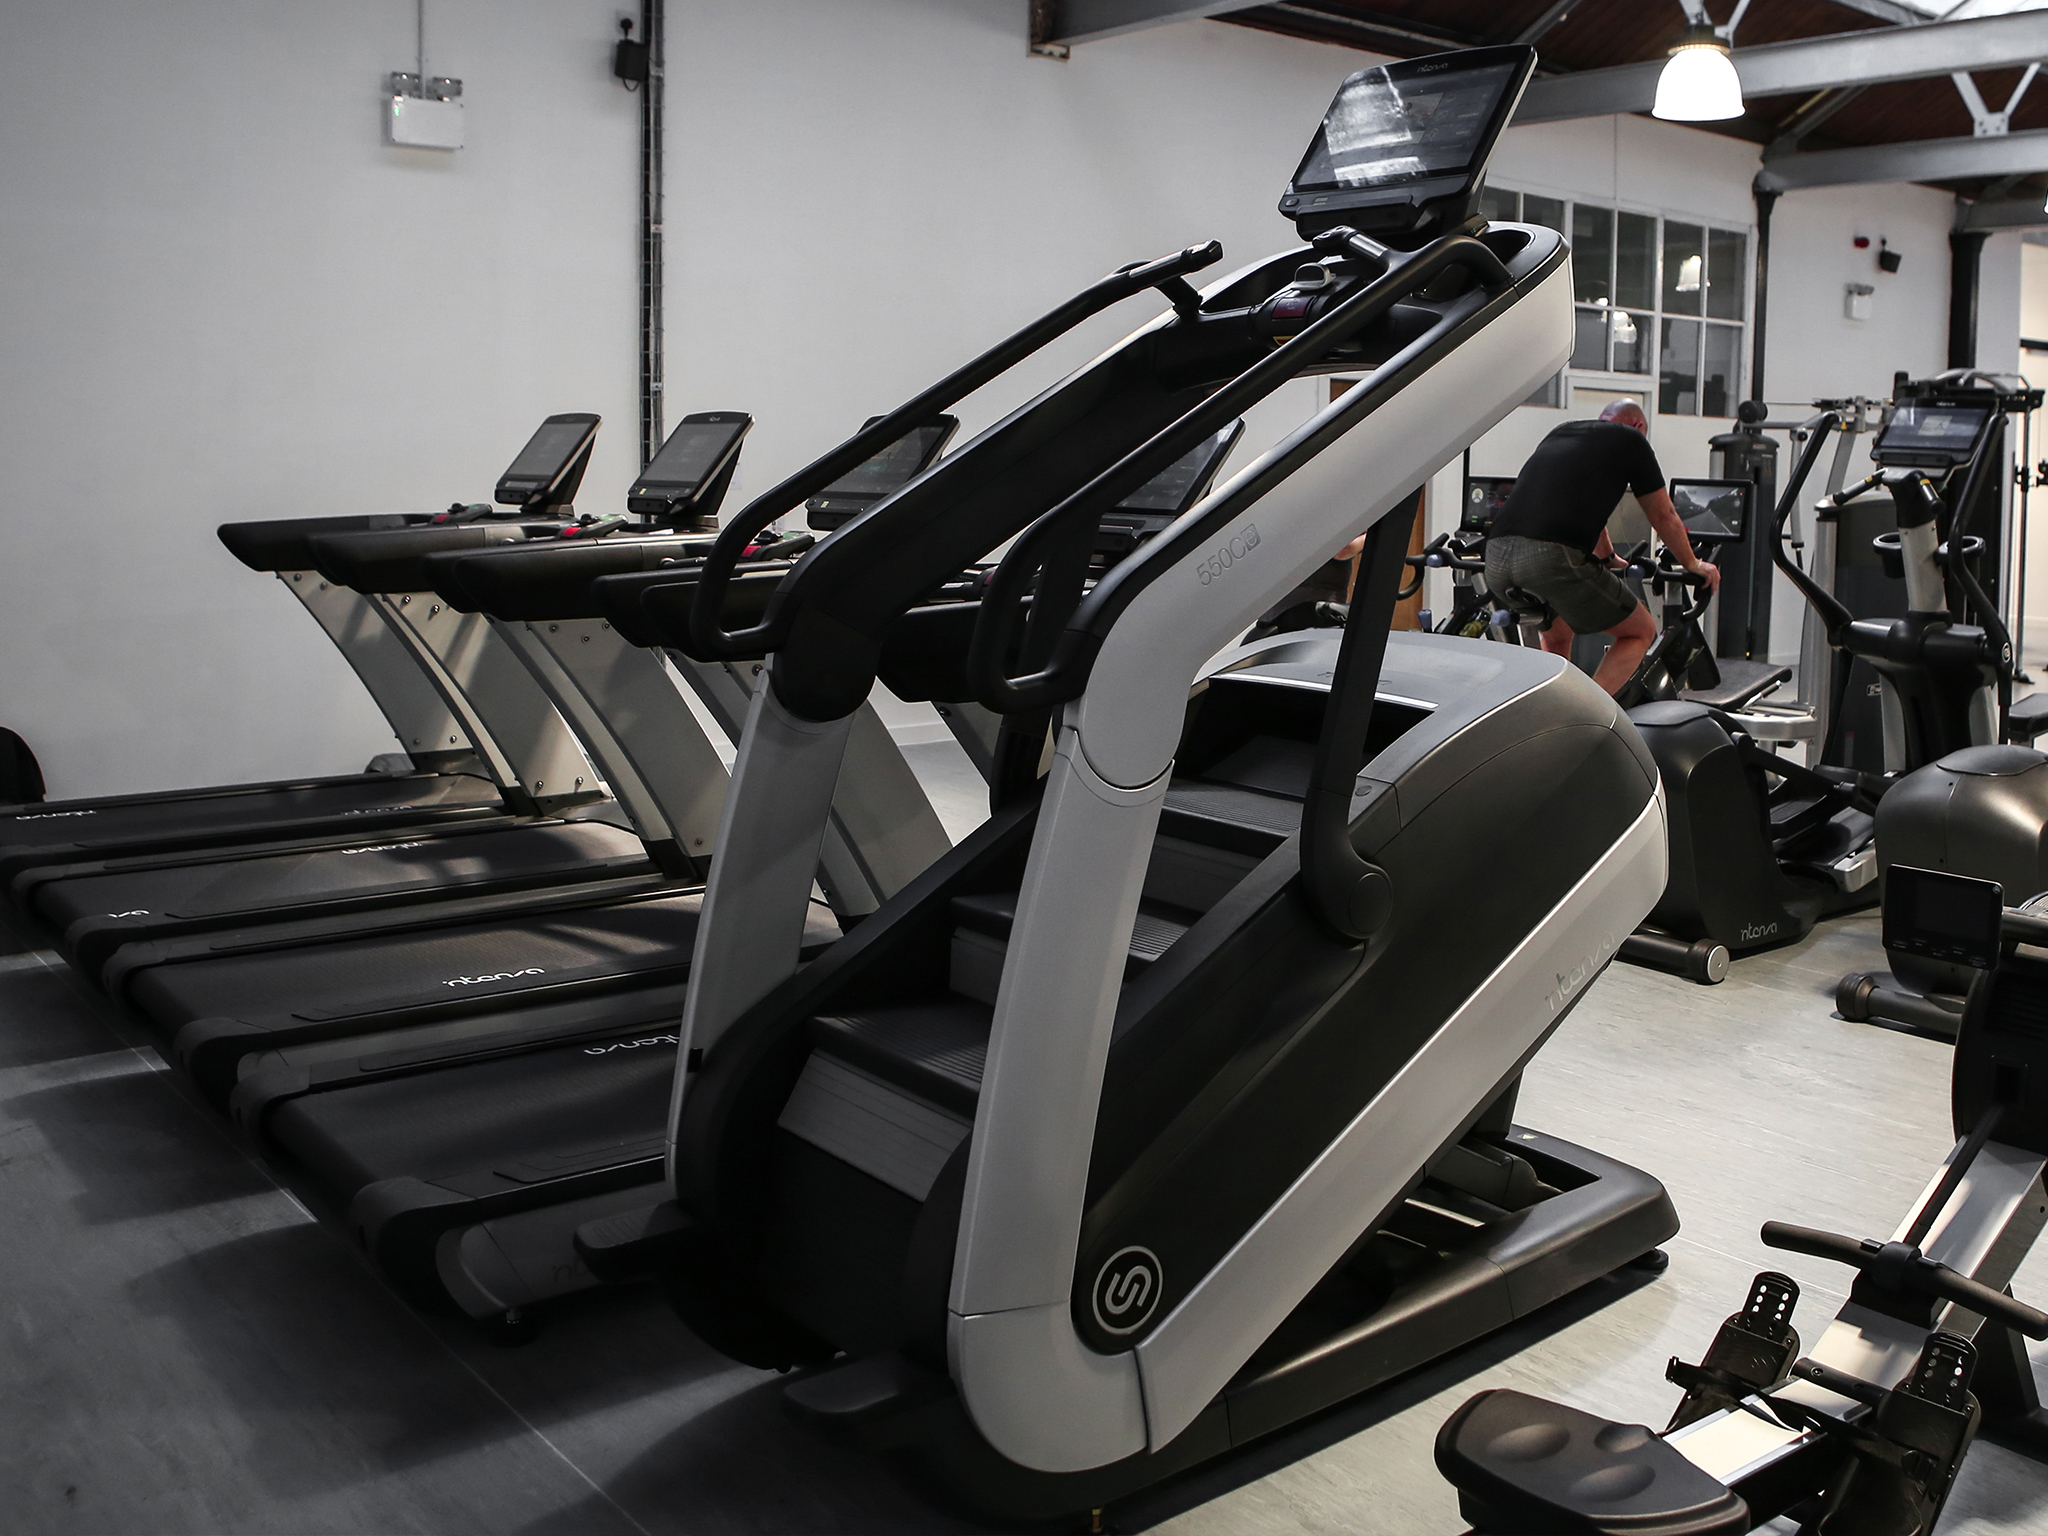 Intenza Treadmill and Escalate Stairclimber Cardio Line installed in uGym in Scotland